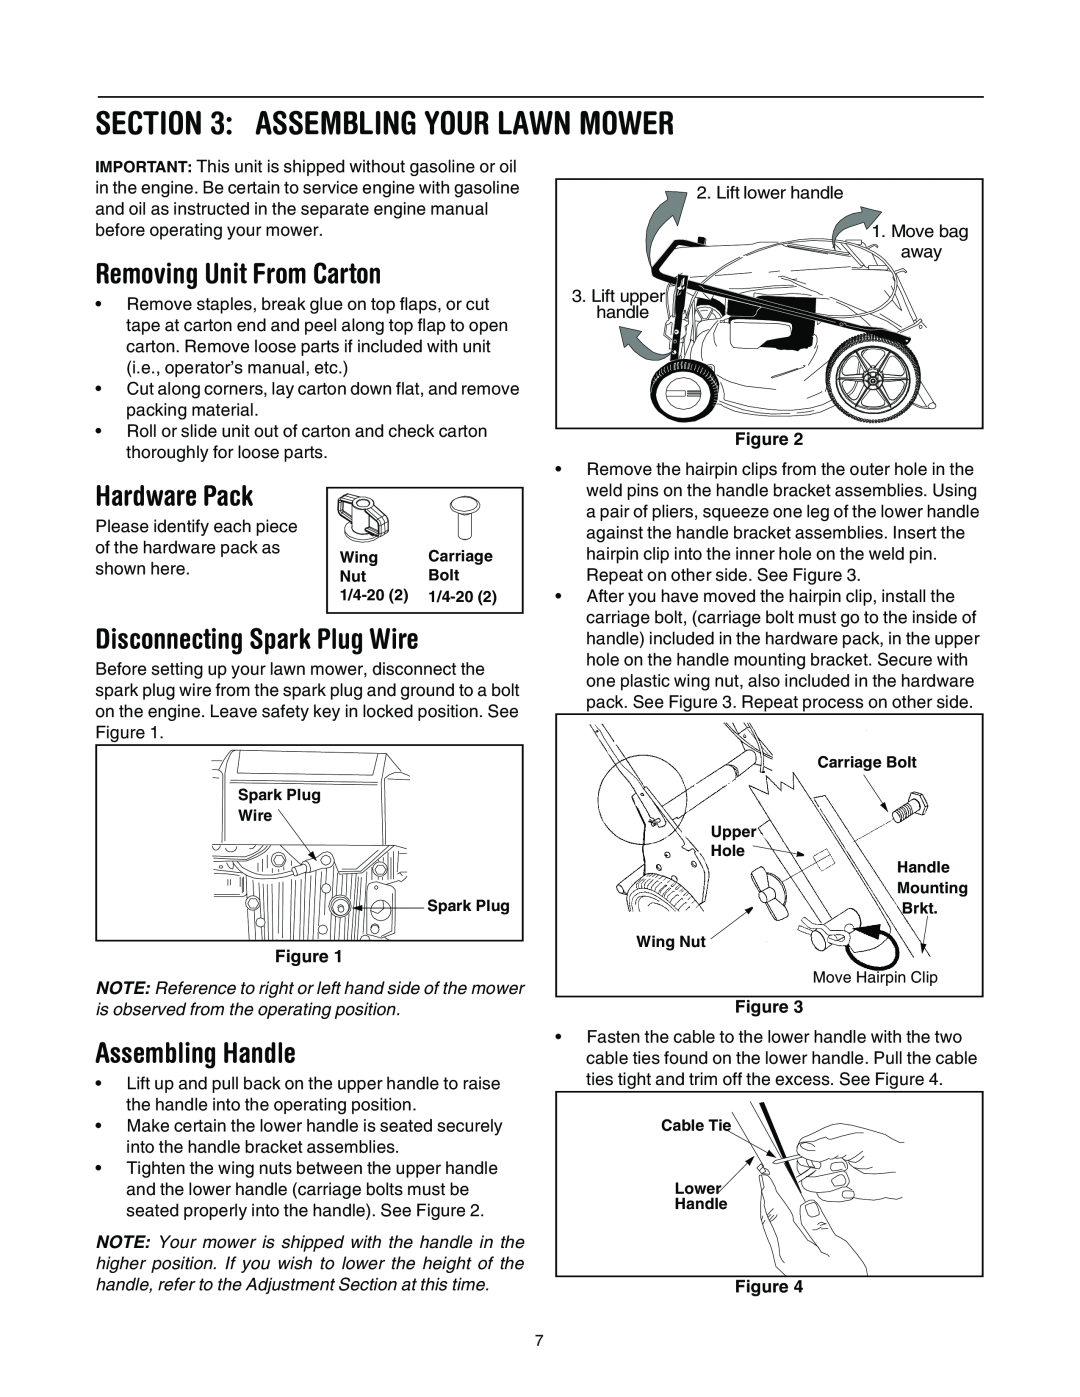 Bolens 589 Assembling Your Lawn Mower, Removing Unit From Carton, Hardware Pack, Disconnecting Spark Plug Wire, shown here 